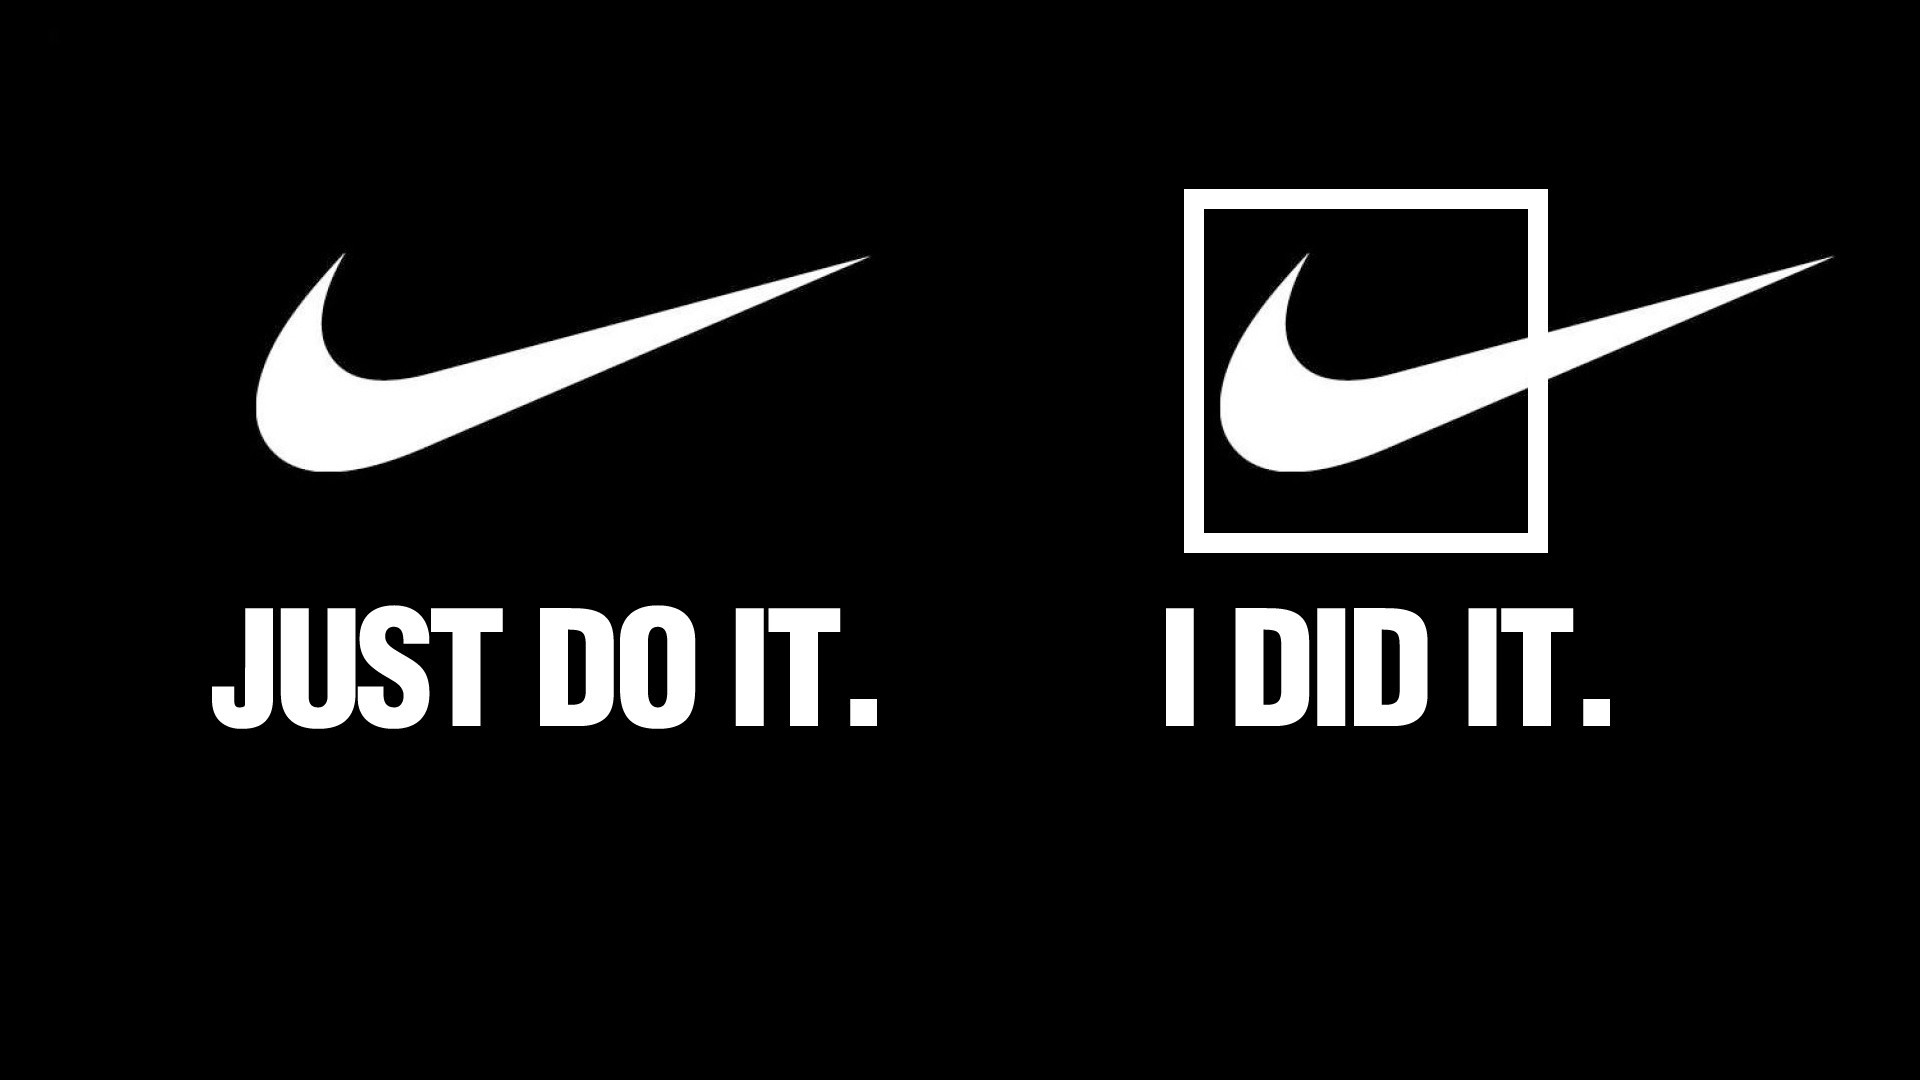 nike wallpaper quotes